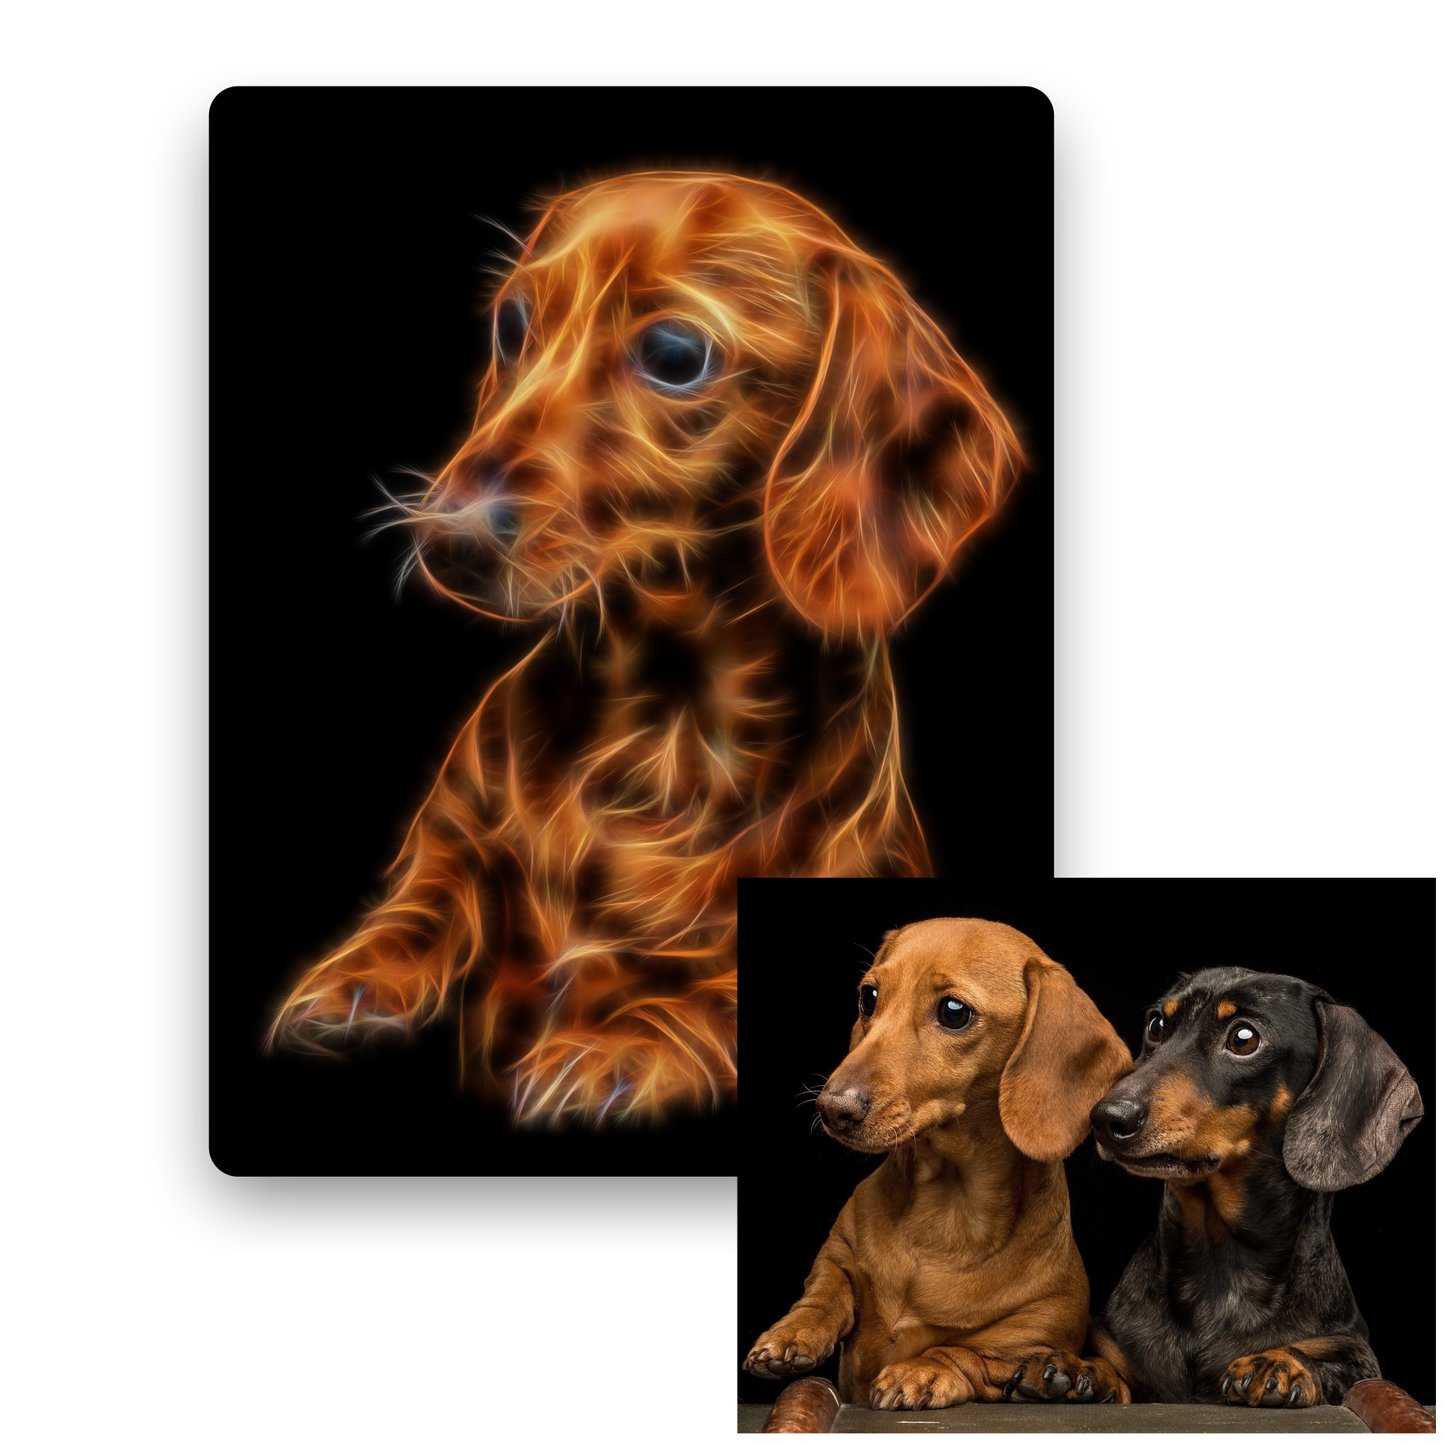 Custom Metal Wall Plaque of your Pet in Fractal Art Style.